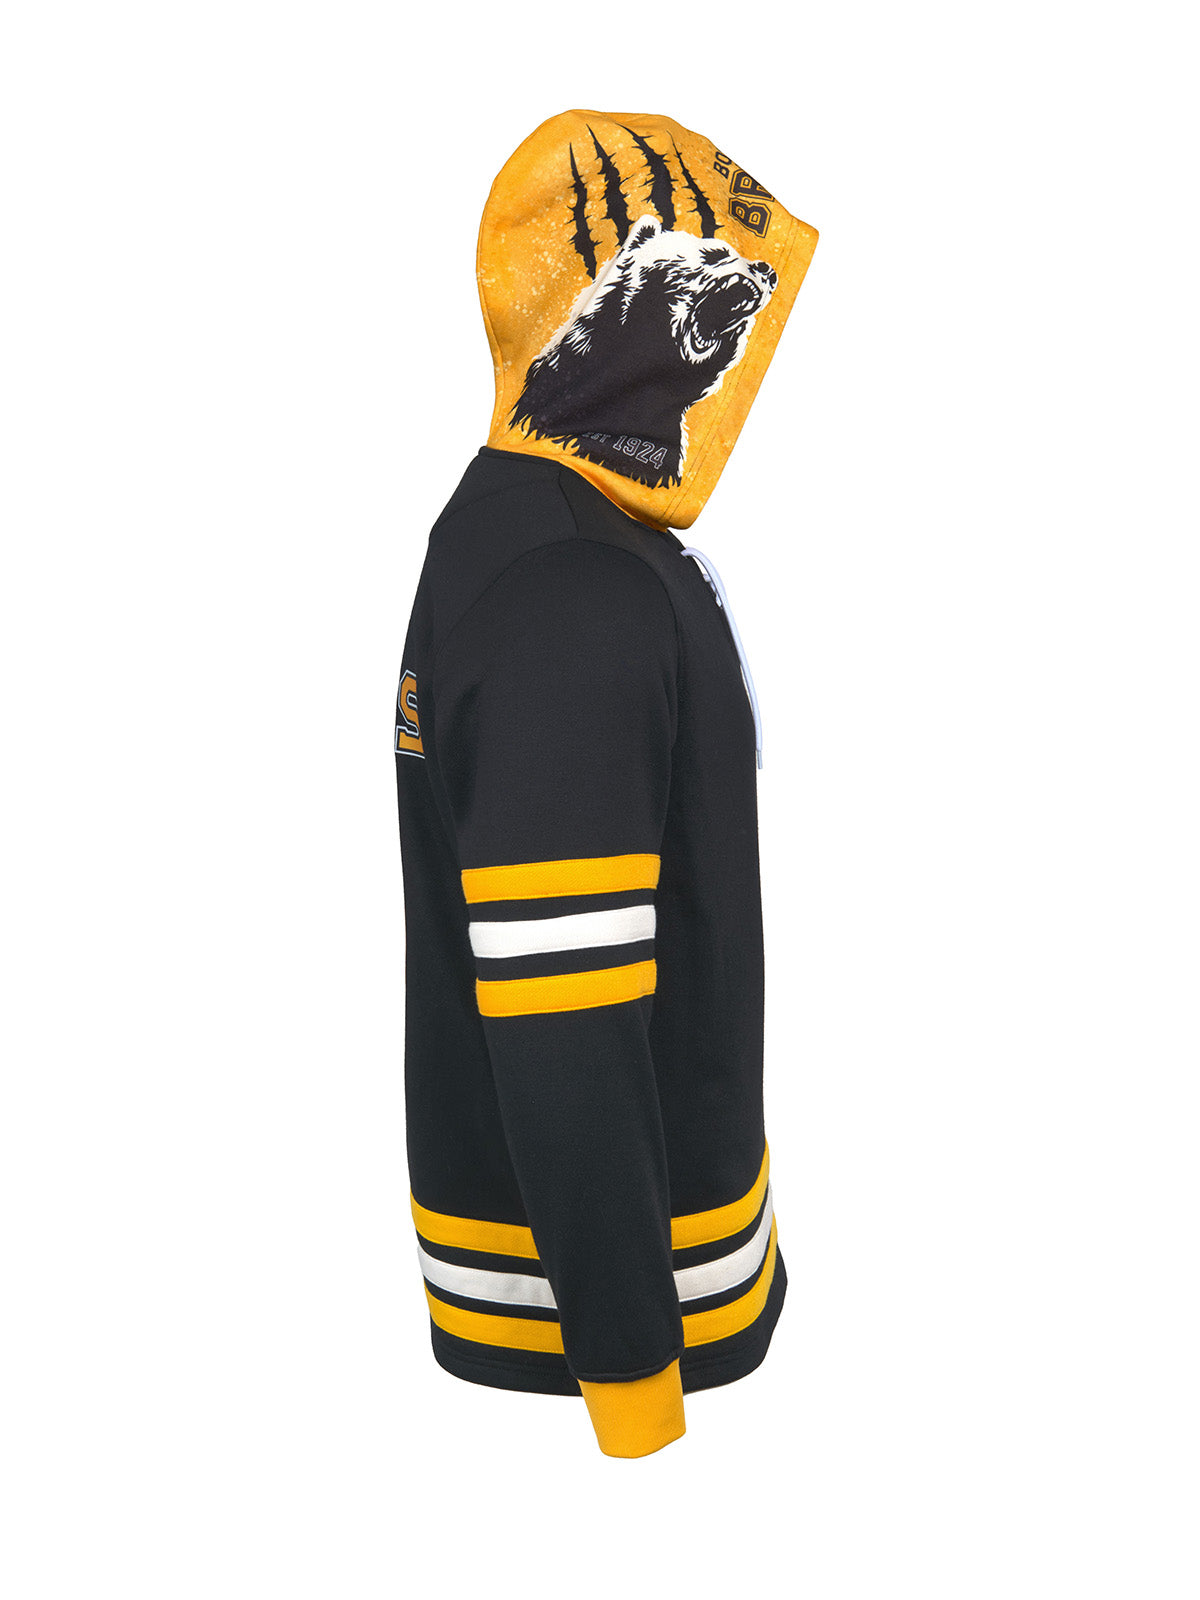 Boston Bruins Lace-Up Hoodie